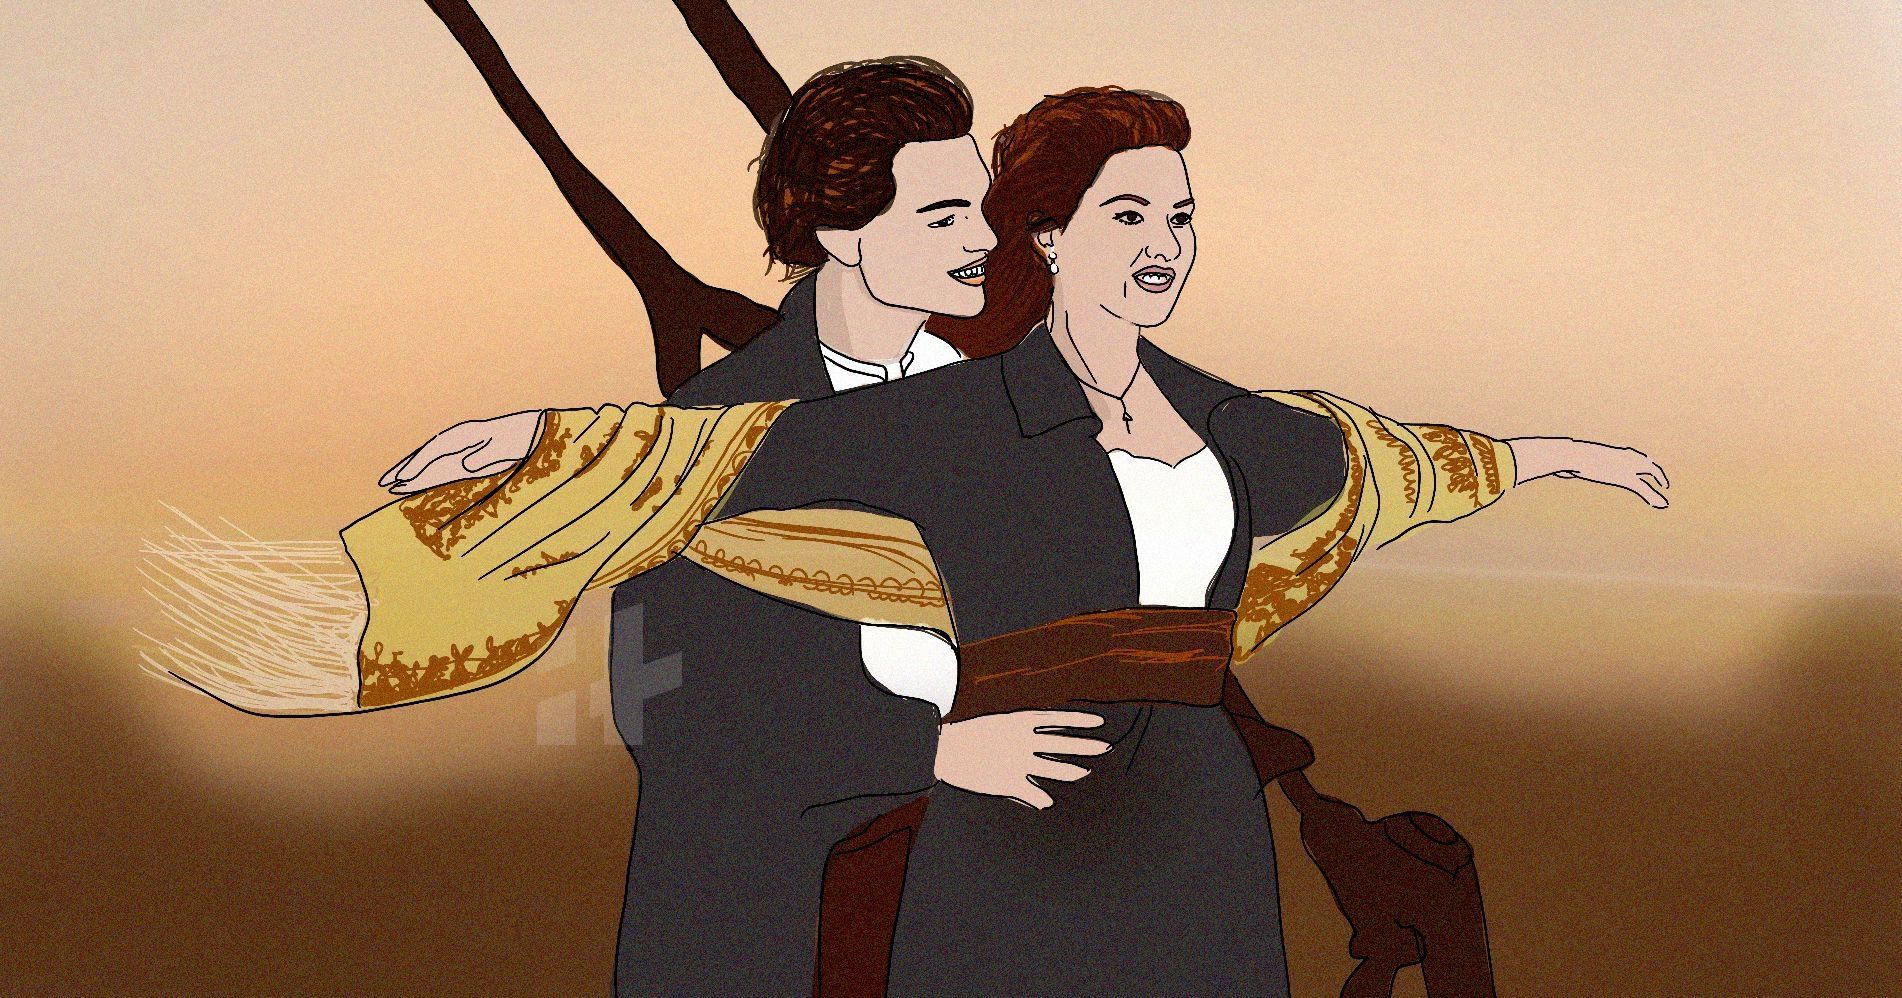 10+ Titanic Pose Stock Videos and Royalty-Free Footage - iStock